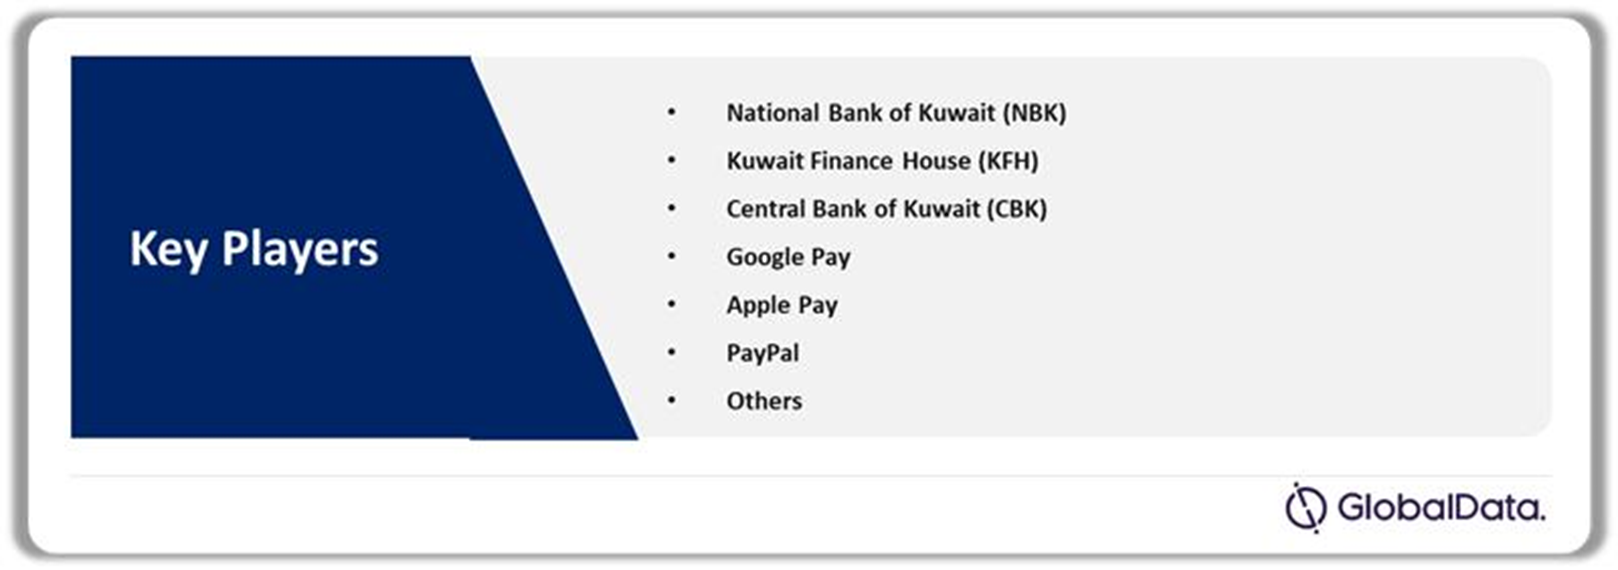 Kuwait Cards and Payments Market Analysis by Players, 2023